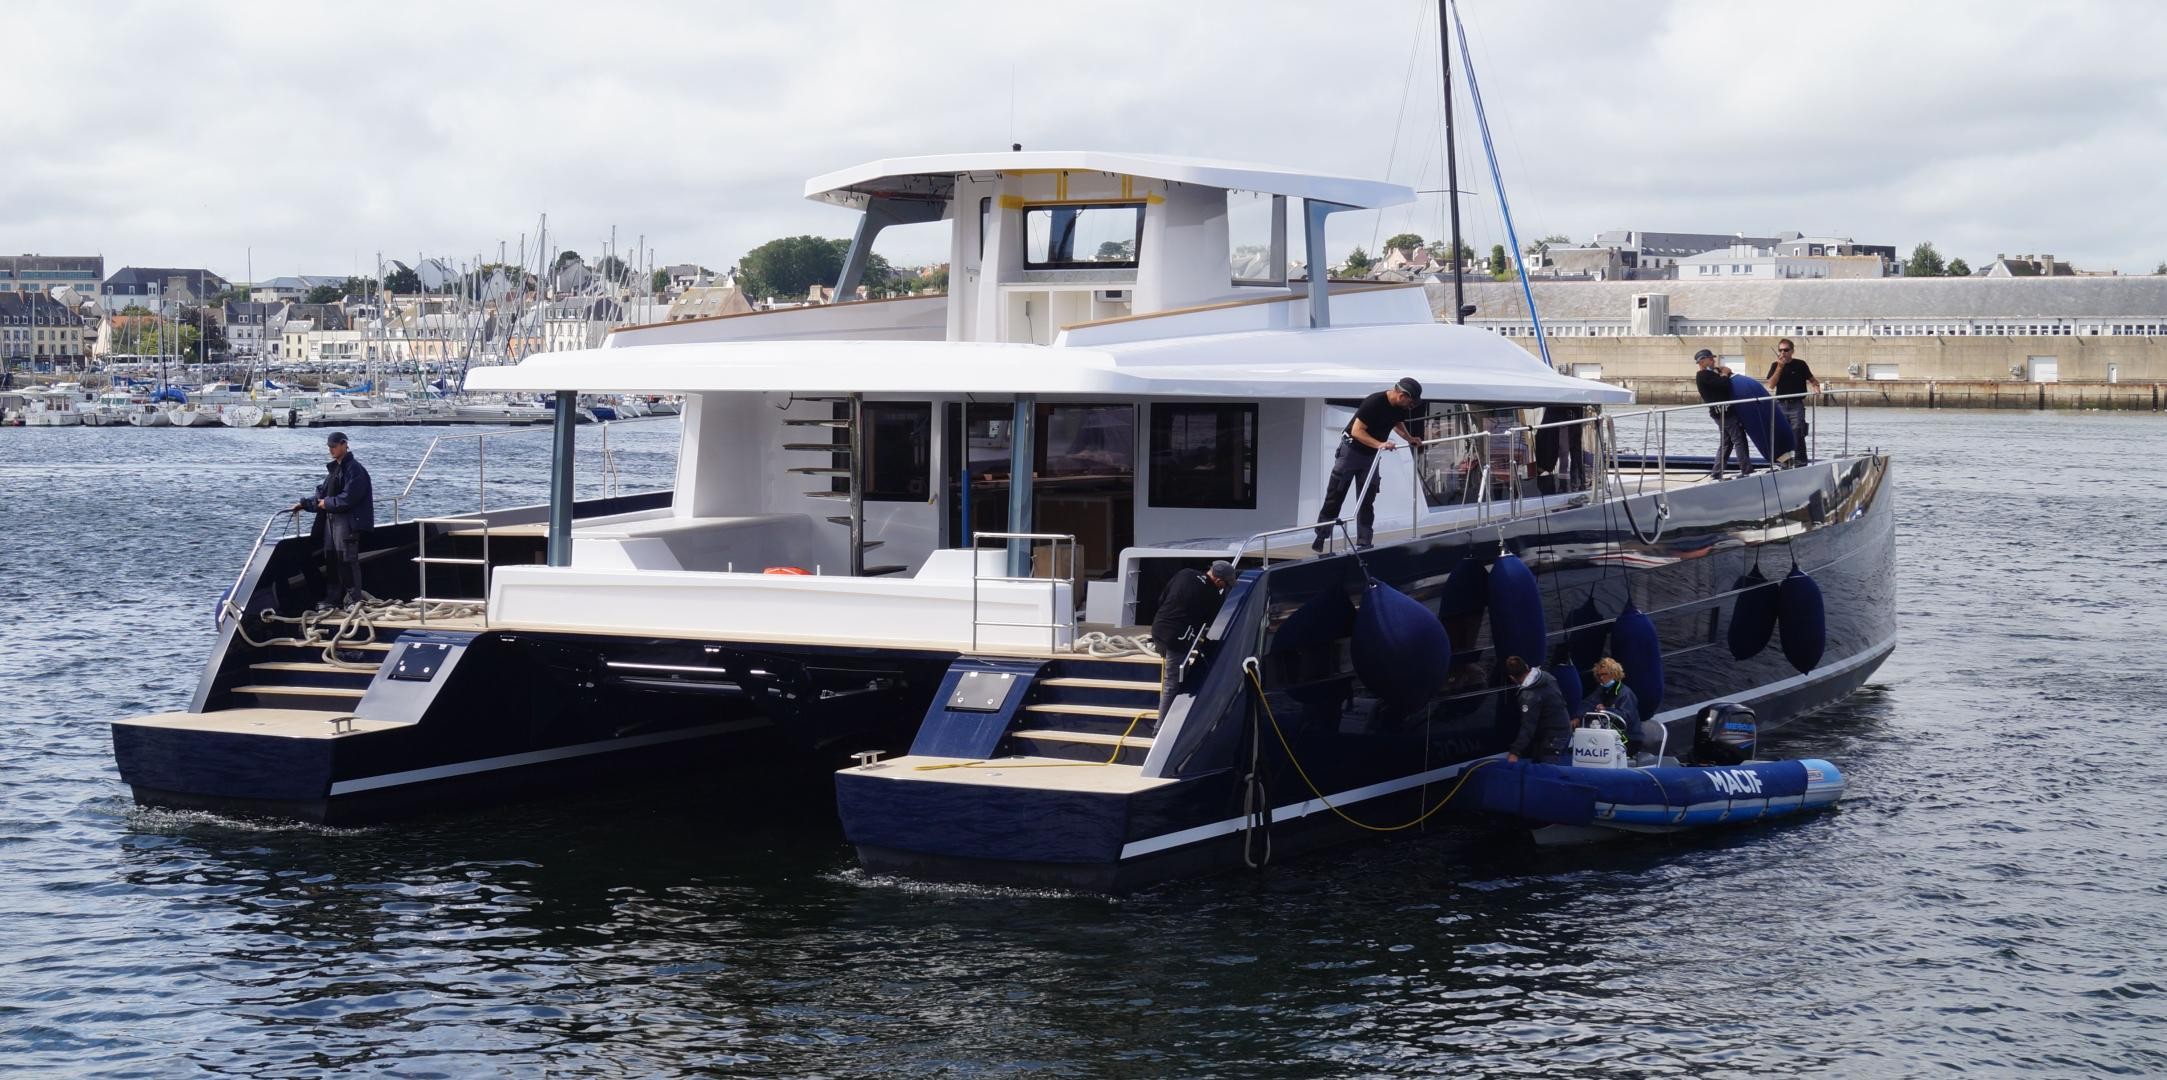 JFA Yachts has just launched the first Long Island 78 ’Power